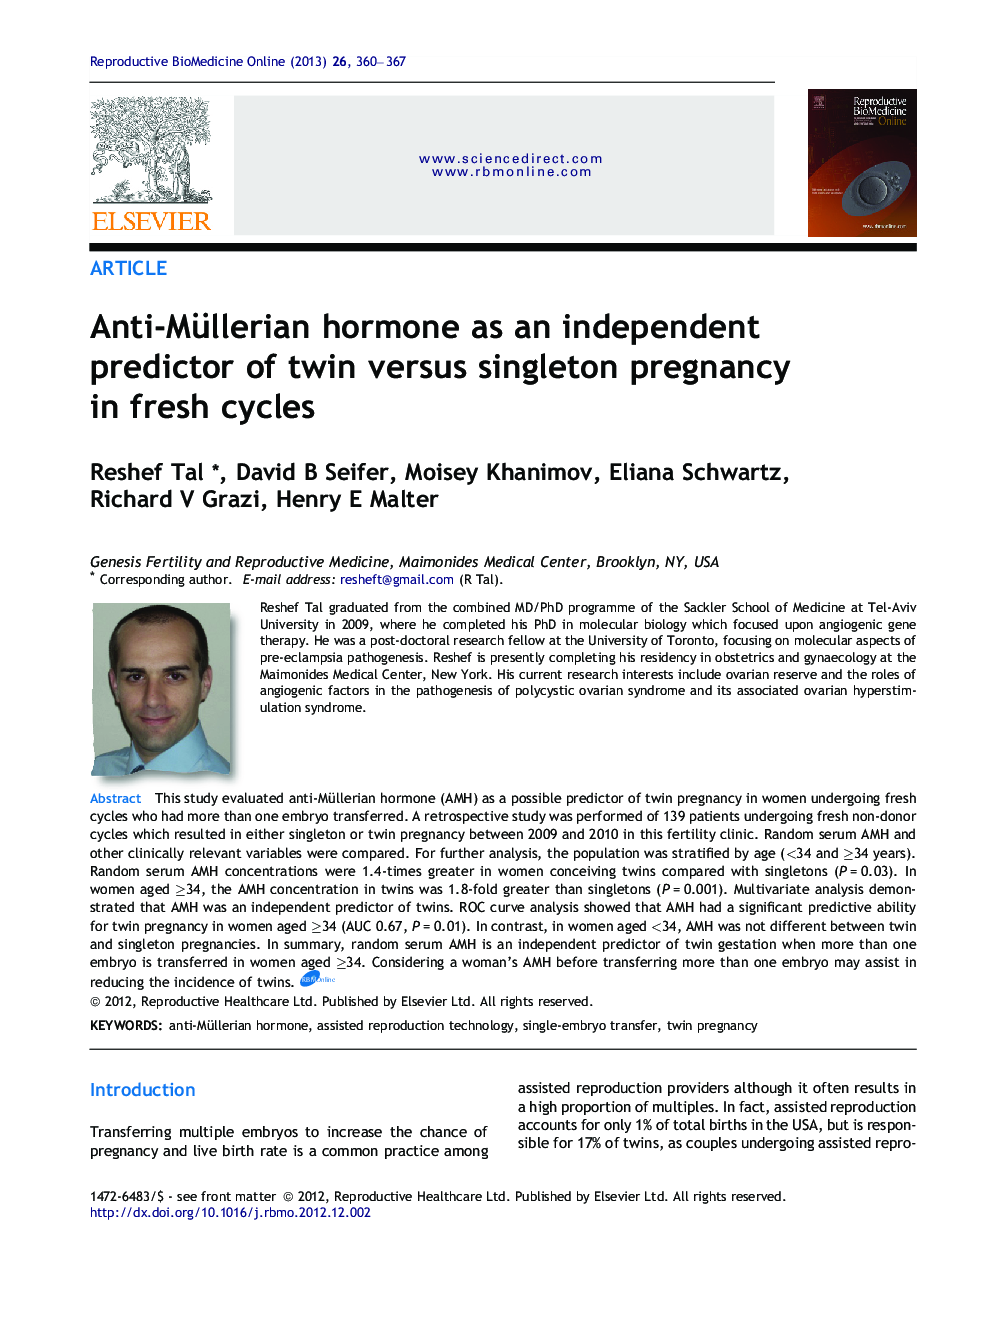 Anti-Müllerian hormone as an independent predictor of twin versus singleton pregnancy in fresh cycles